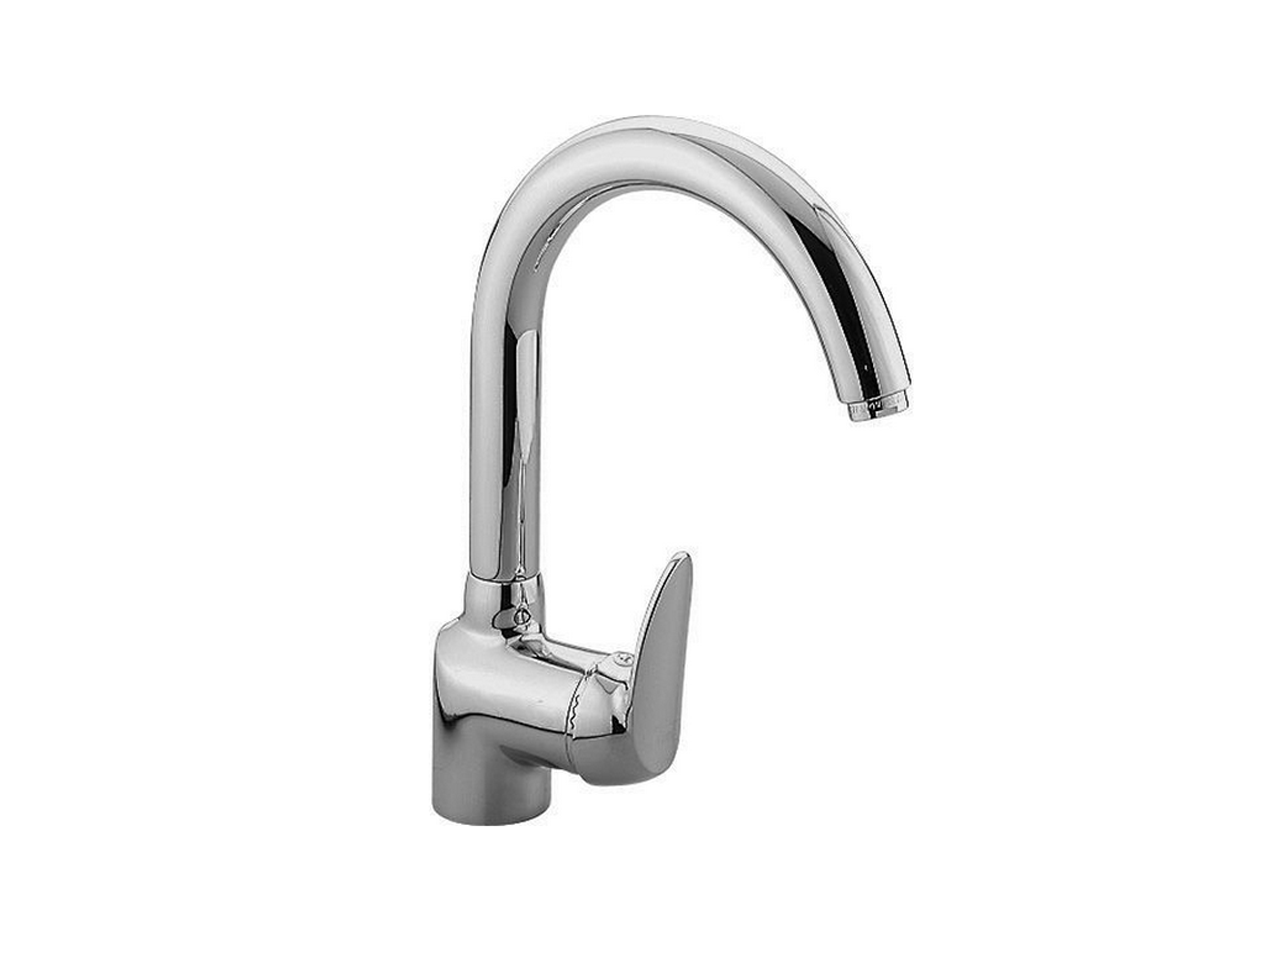 CisalSingle lever sink mixer KITCHEN_AT000530